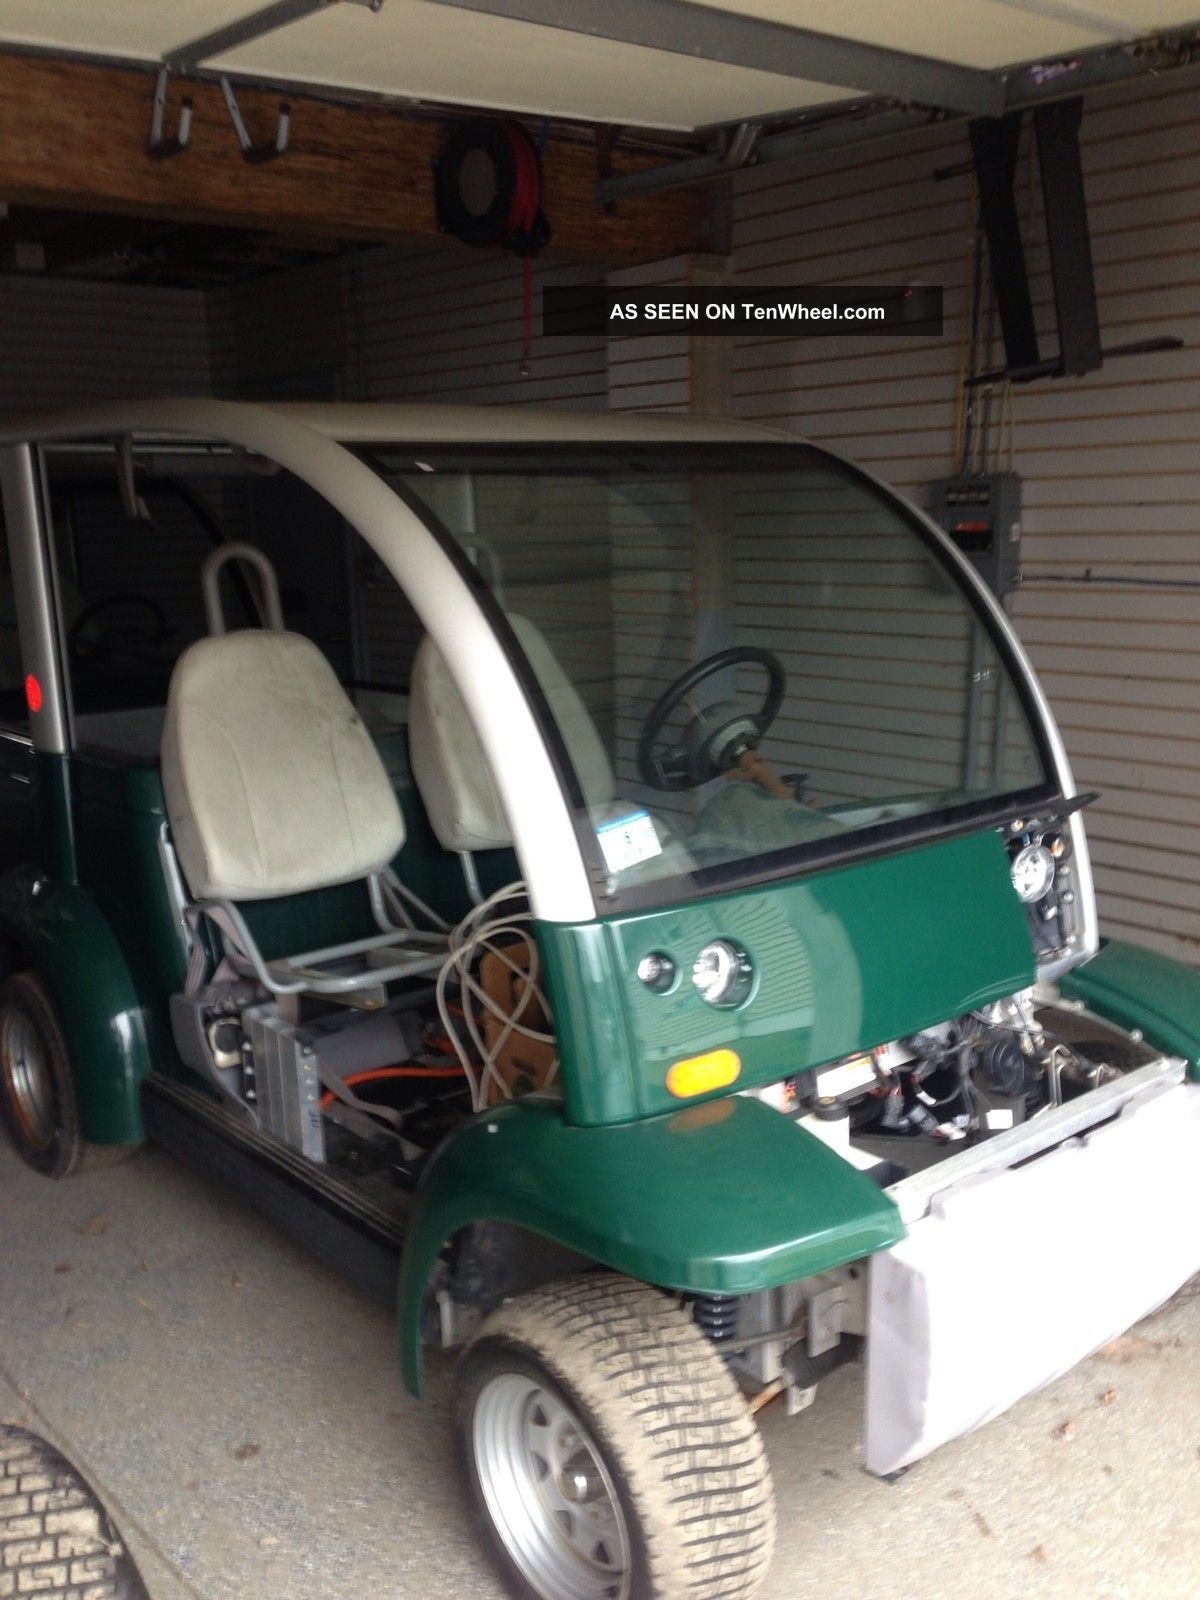 2002 Ford Think Electric Street Legal Car Will Trade Has Nj Title